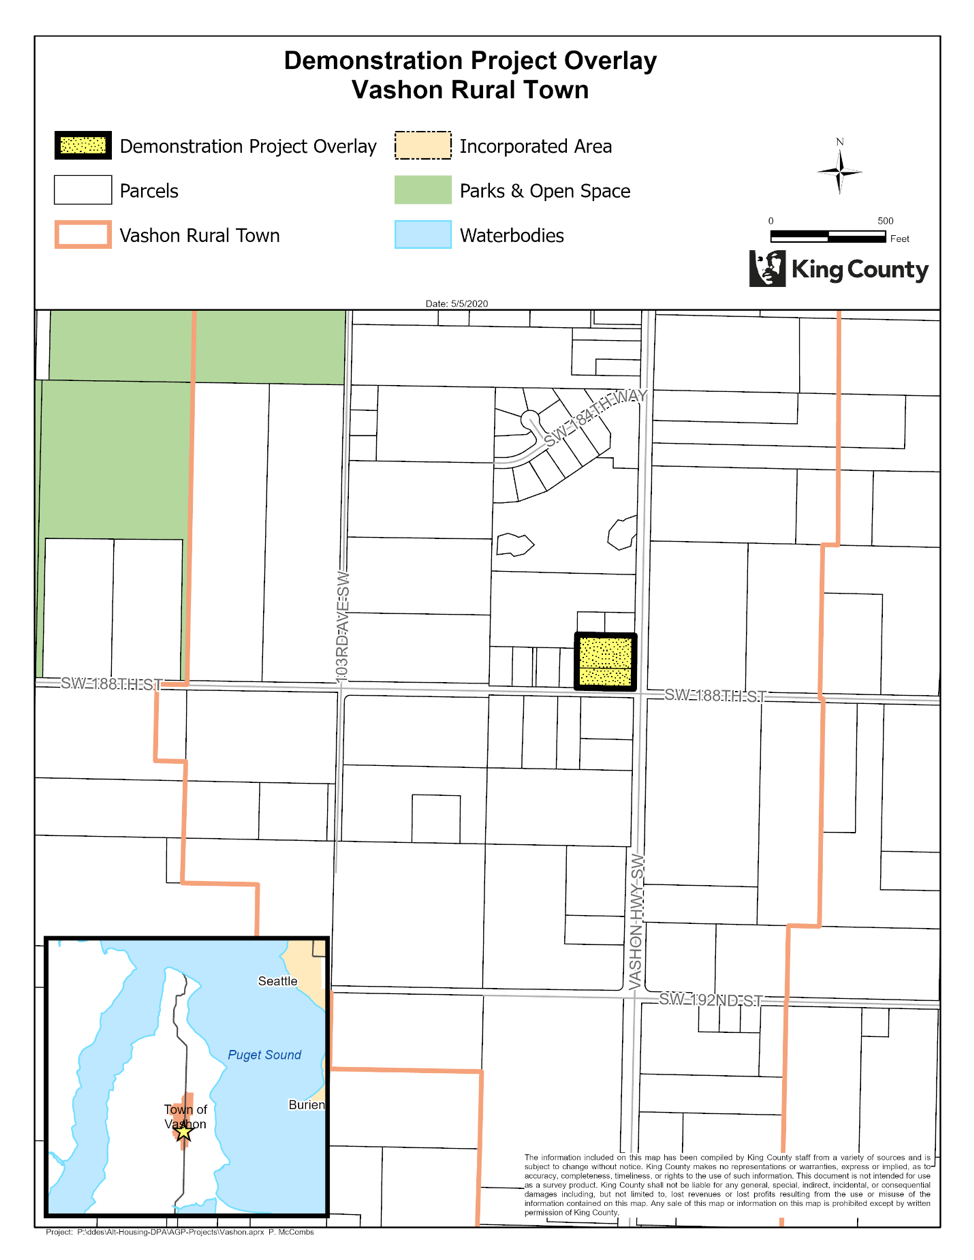 The zoning overlay in Vashon where a demonstration project could be realized. (King County)